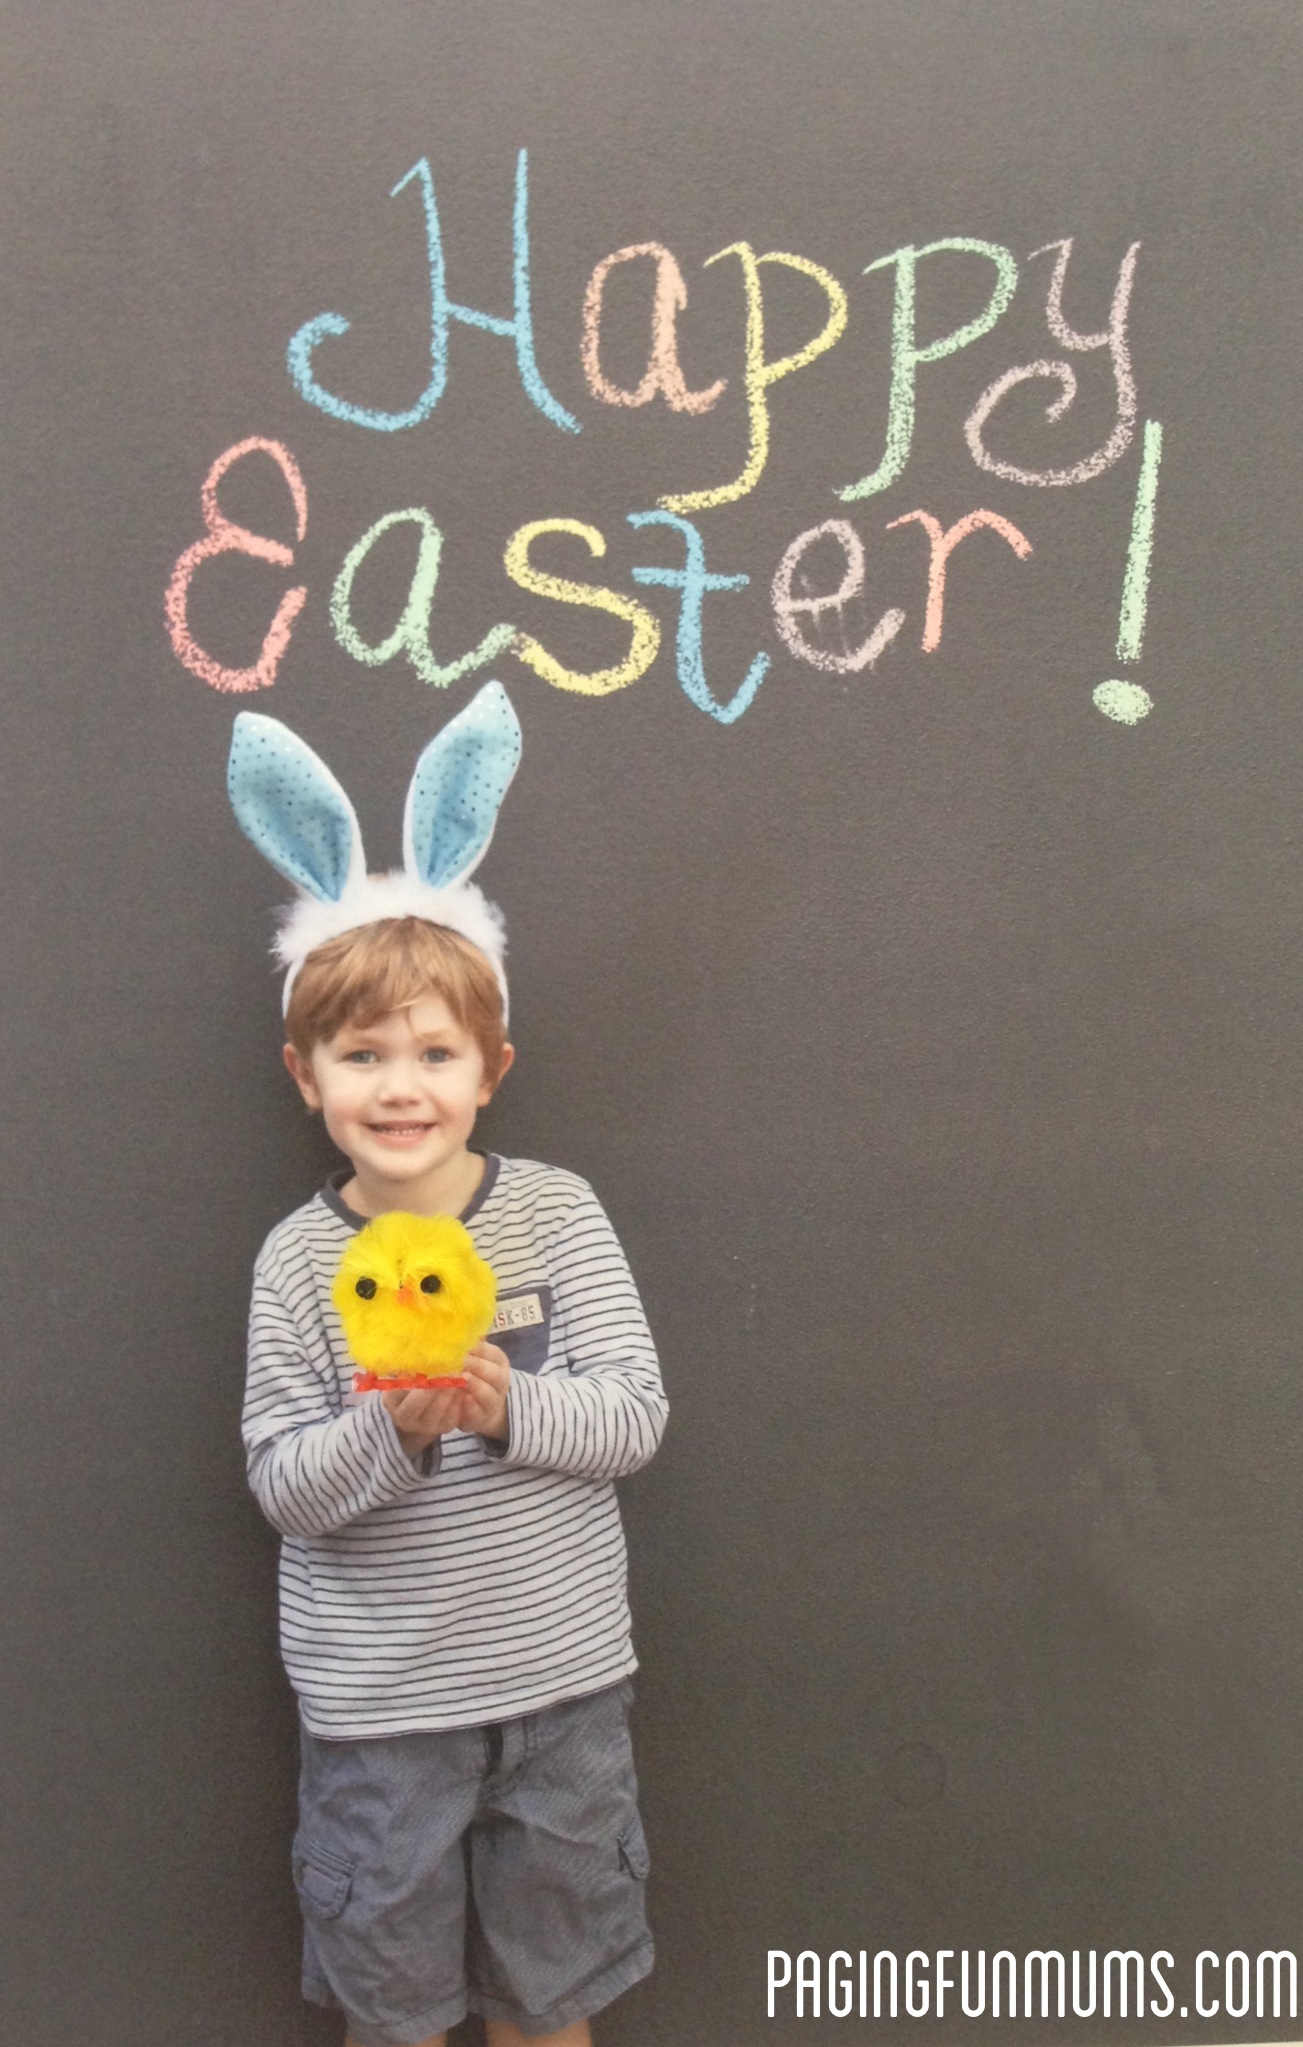 Adorable Easter Card with a twist!